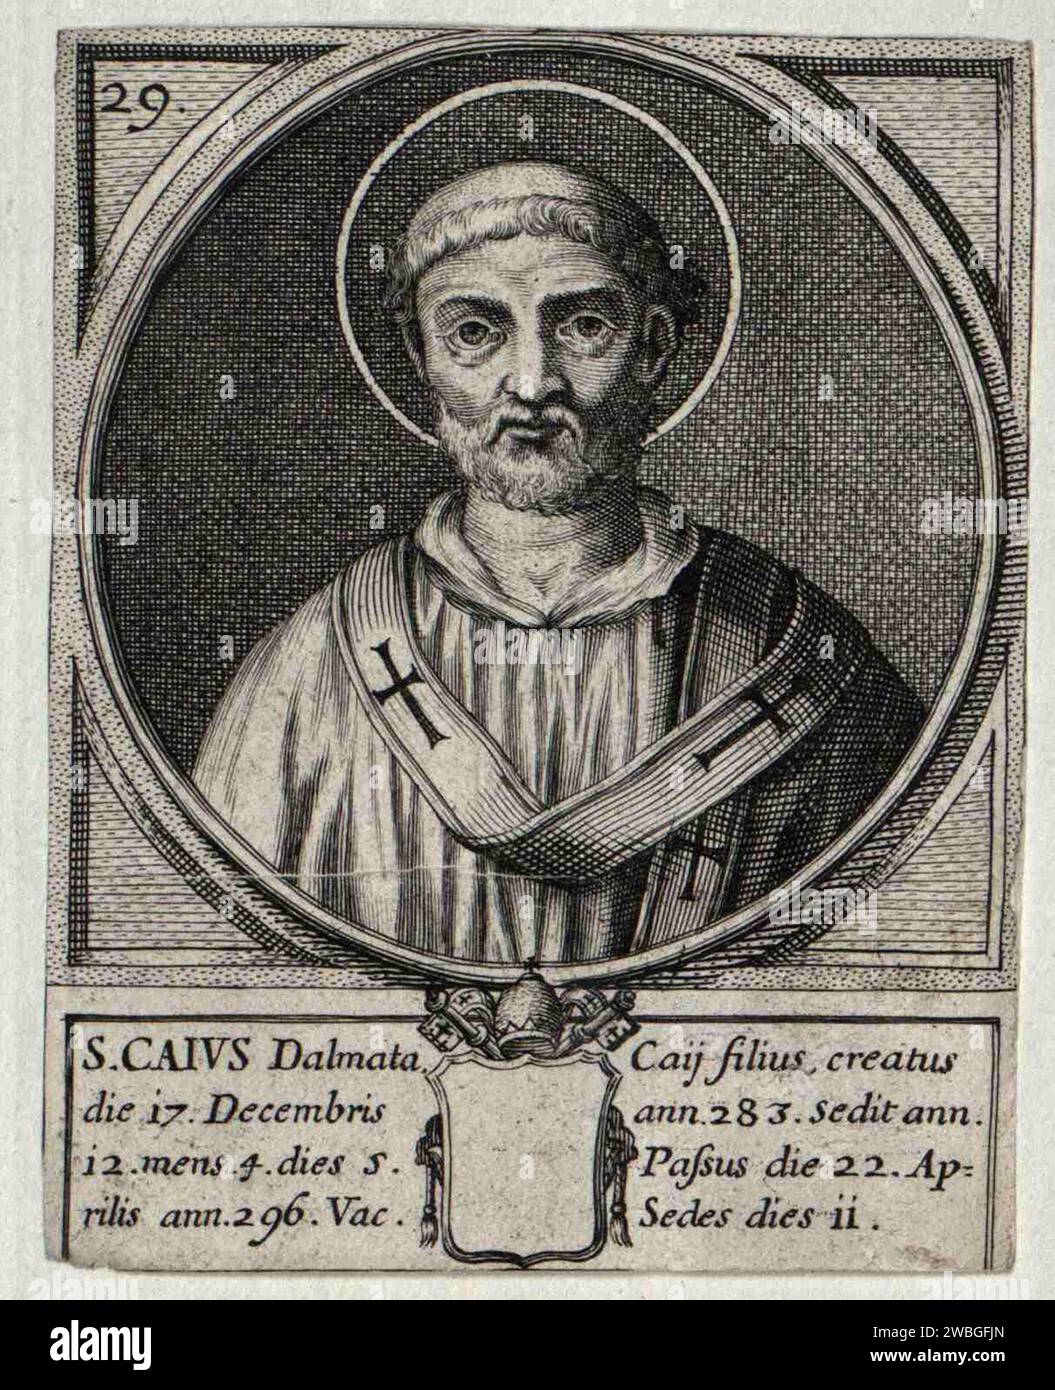 An 1580 engraving of Pope Caius who was pontiff from AD283-AD296. He was the 28th pope. According to legend he was martyred by beheading. Stock Photo